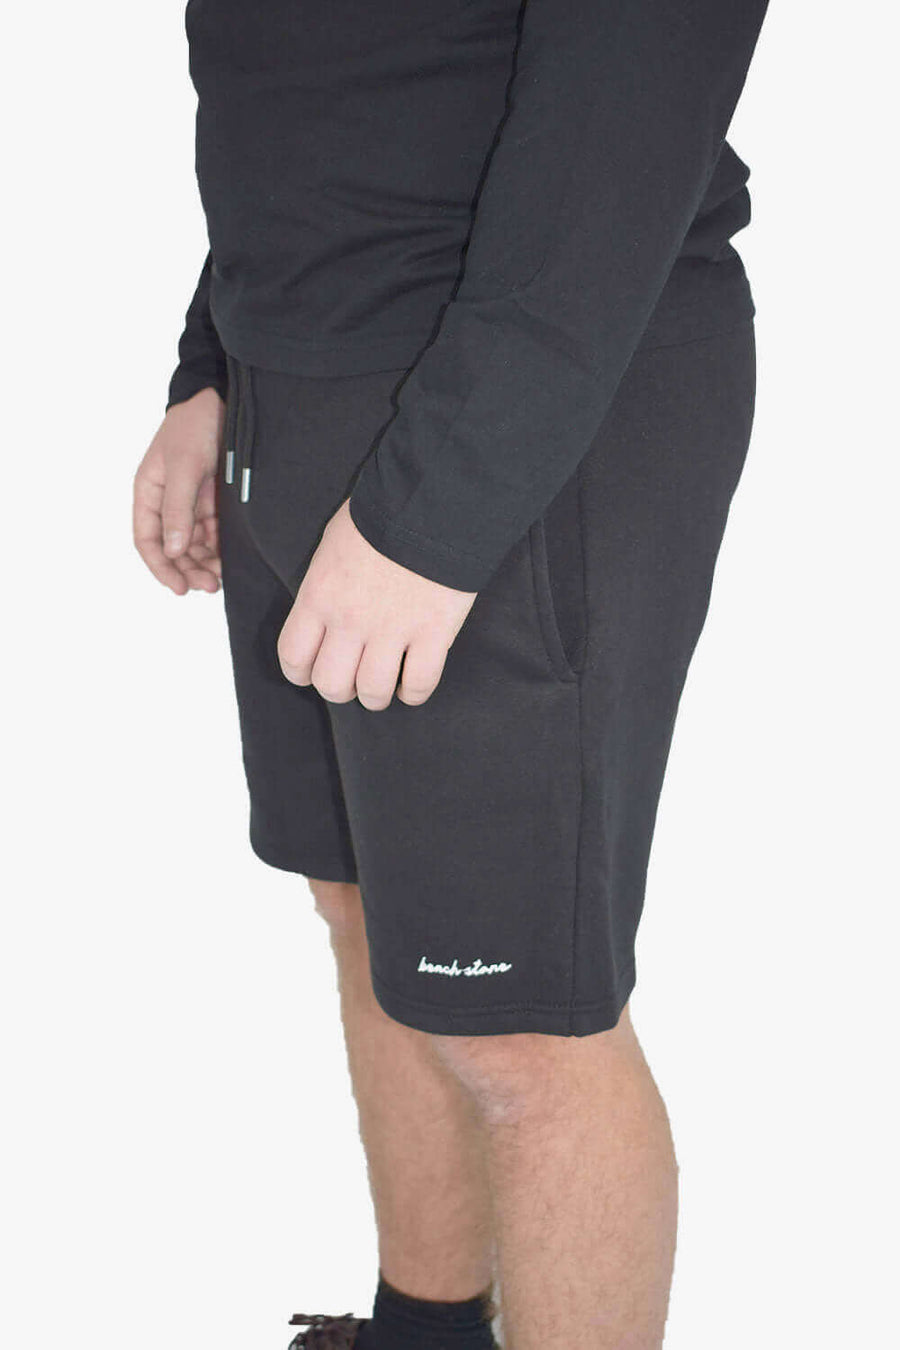 Side View of Regular Men's Gym Shorts in Black for Your Active Lifestyle